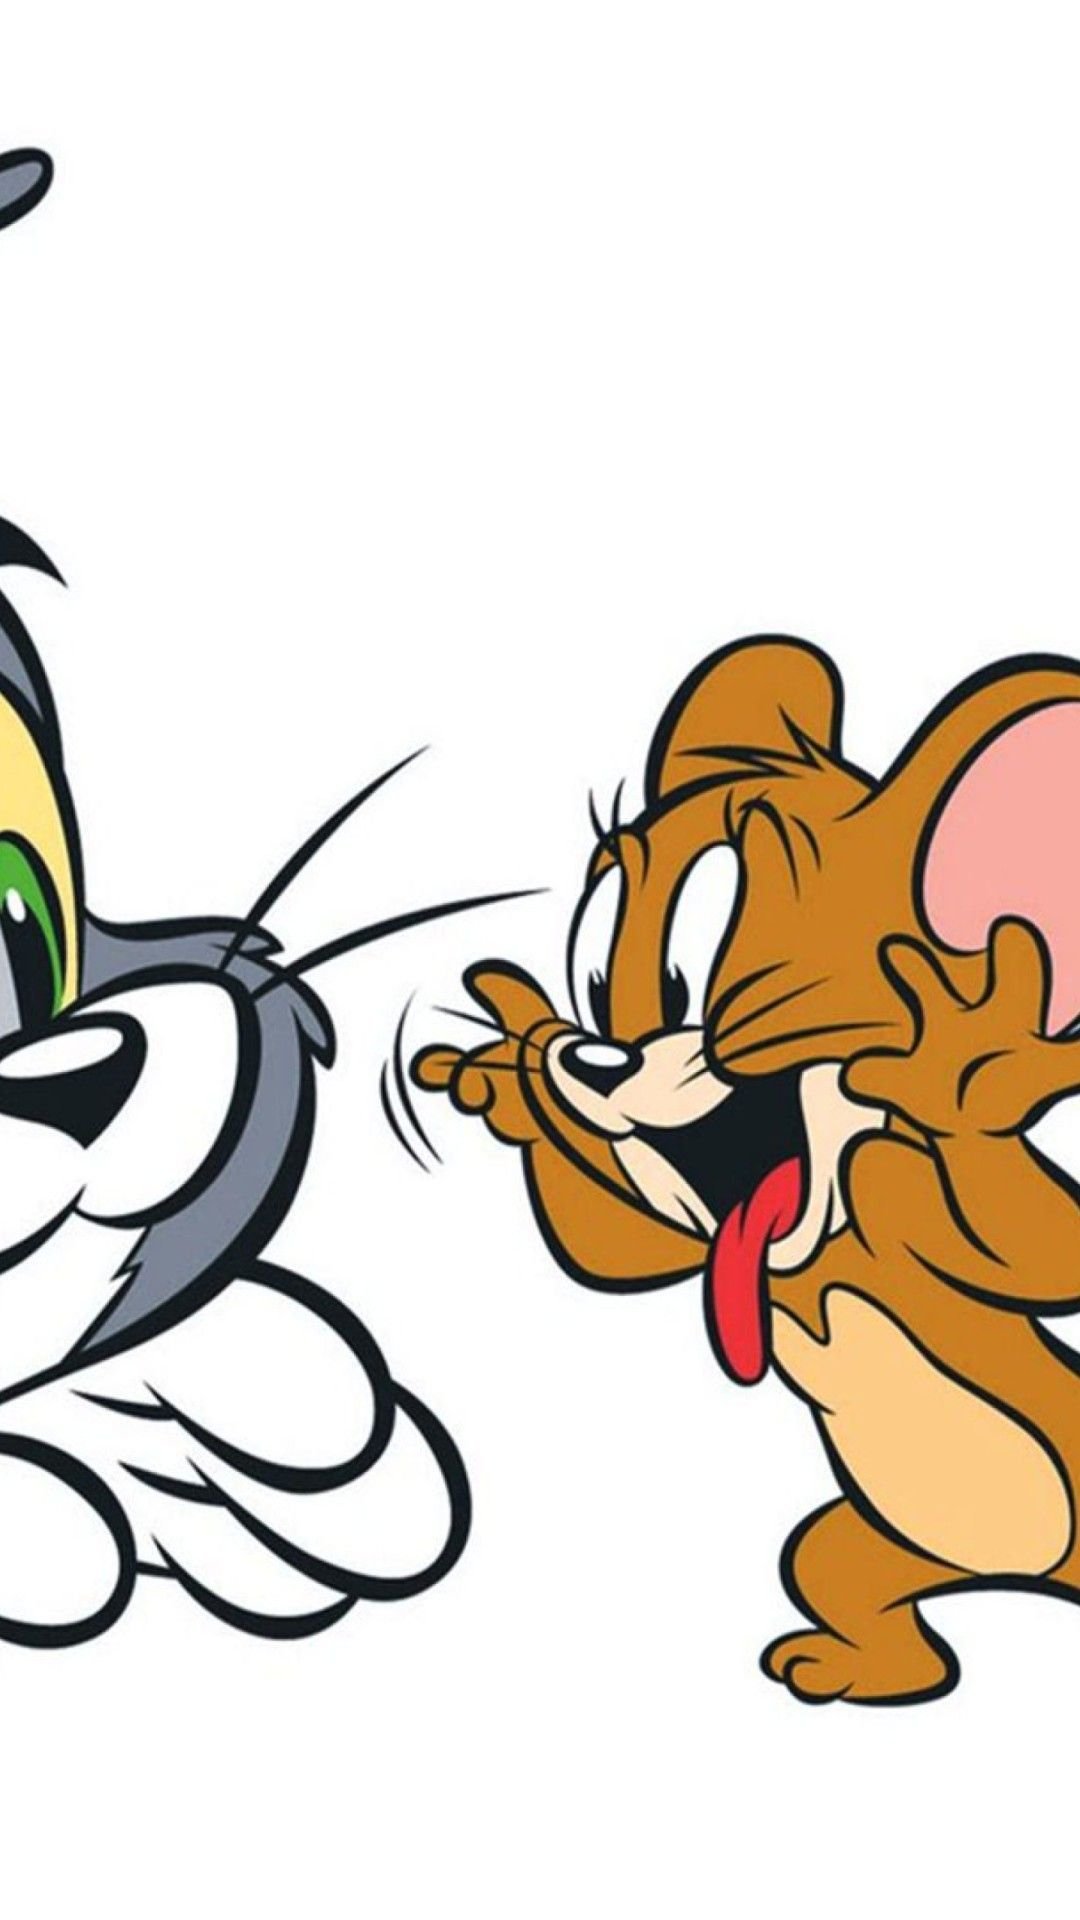 The Tom & Jerry Wallpaper Download | MobCup